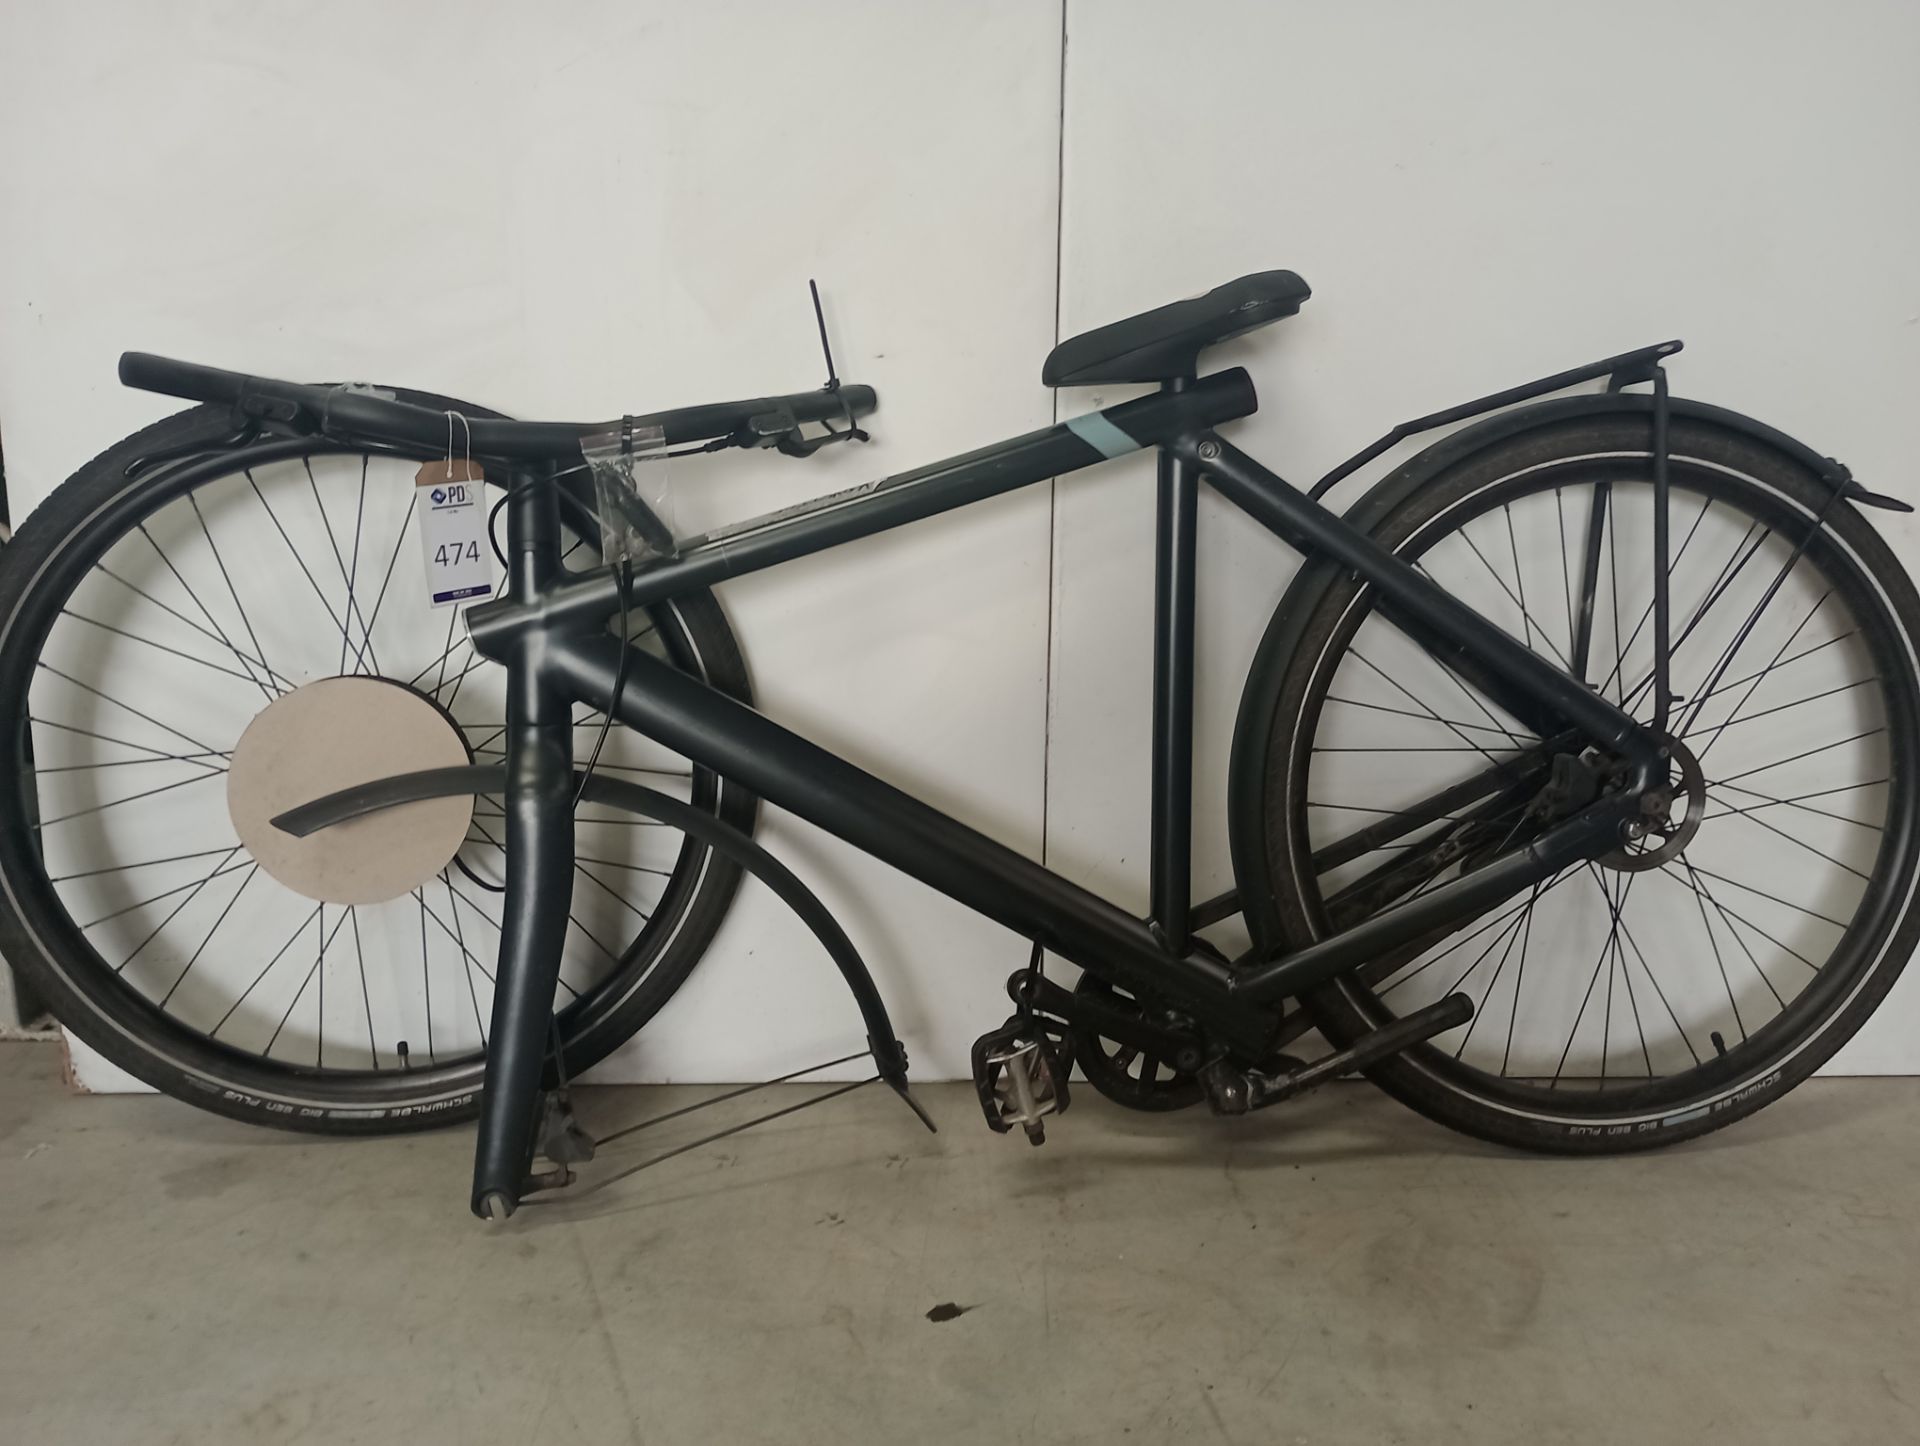 VanMoof S3 Electric Bike, Frame Number ASY1041625 (NOT ROADWORTHY - FOR SPARES ONLY) (No codes